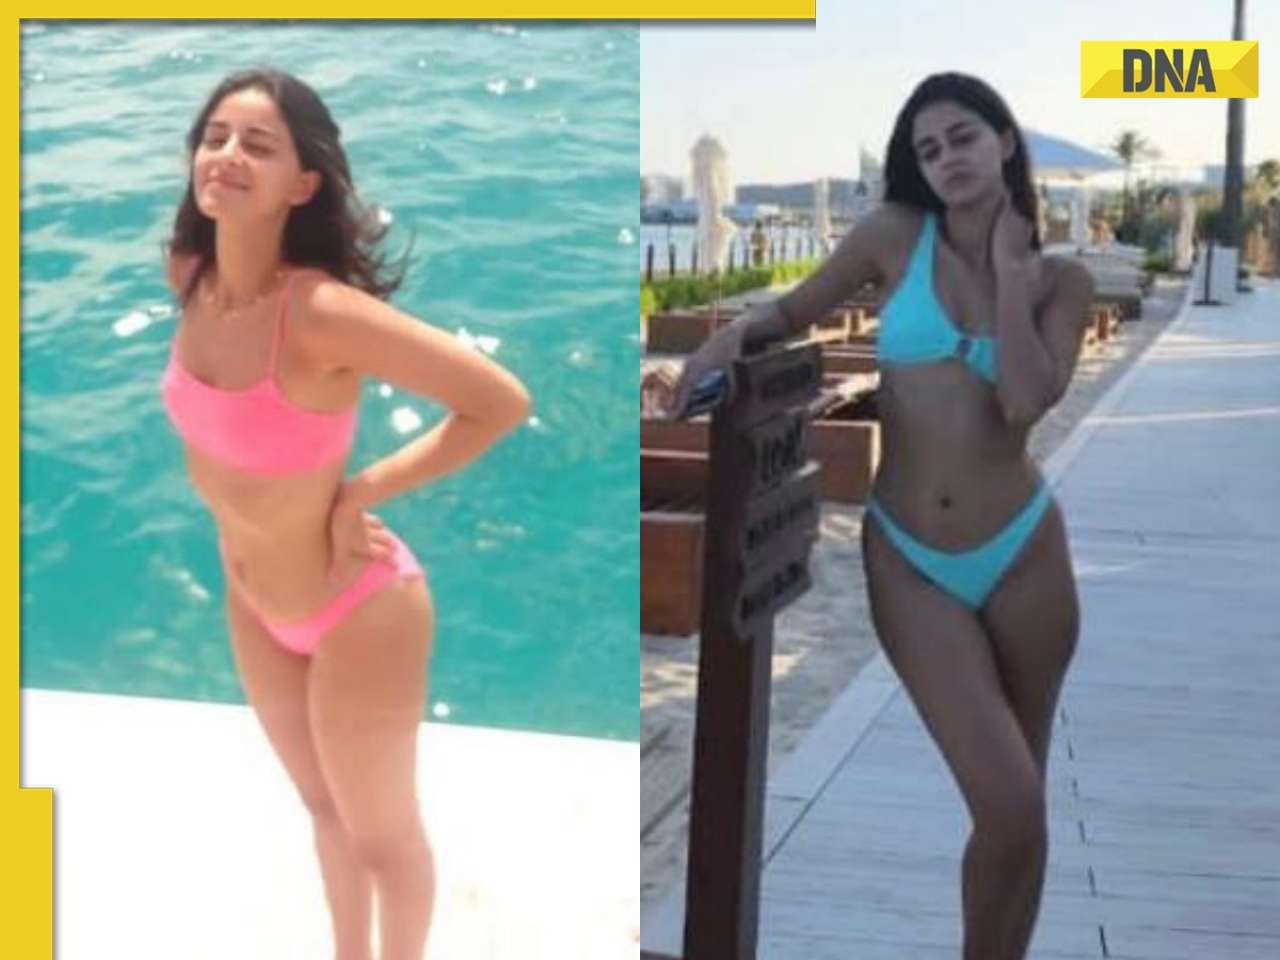 Ananya Panday stuns in unseen bikini pictures in first post amid breakup reports, fans call it 'Aditya Roy Kapur's loss'